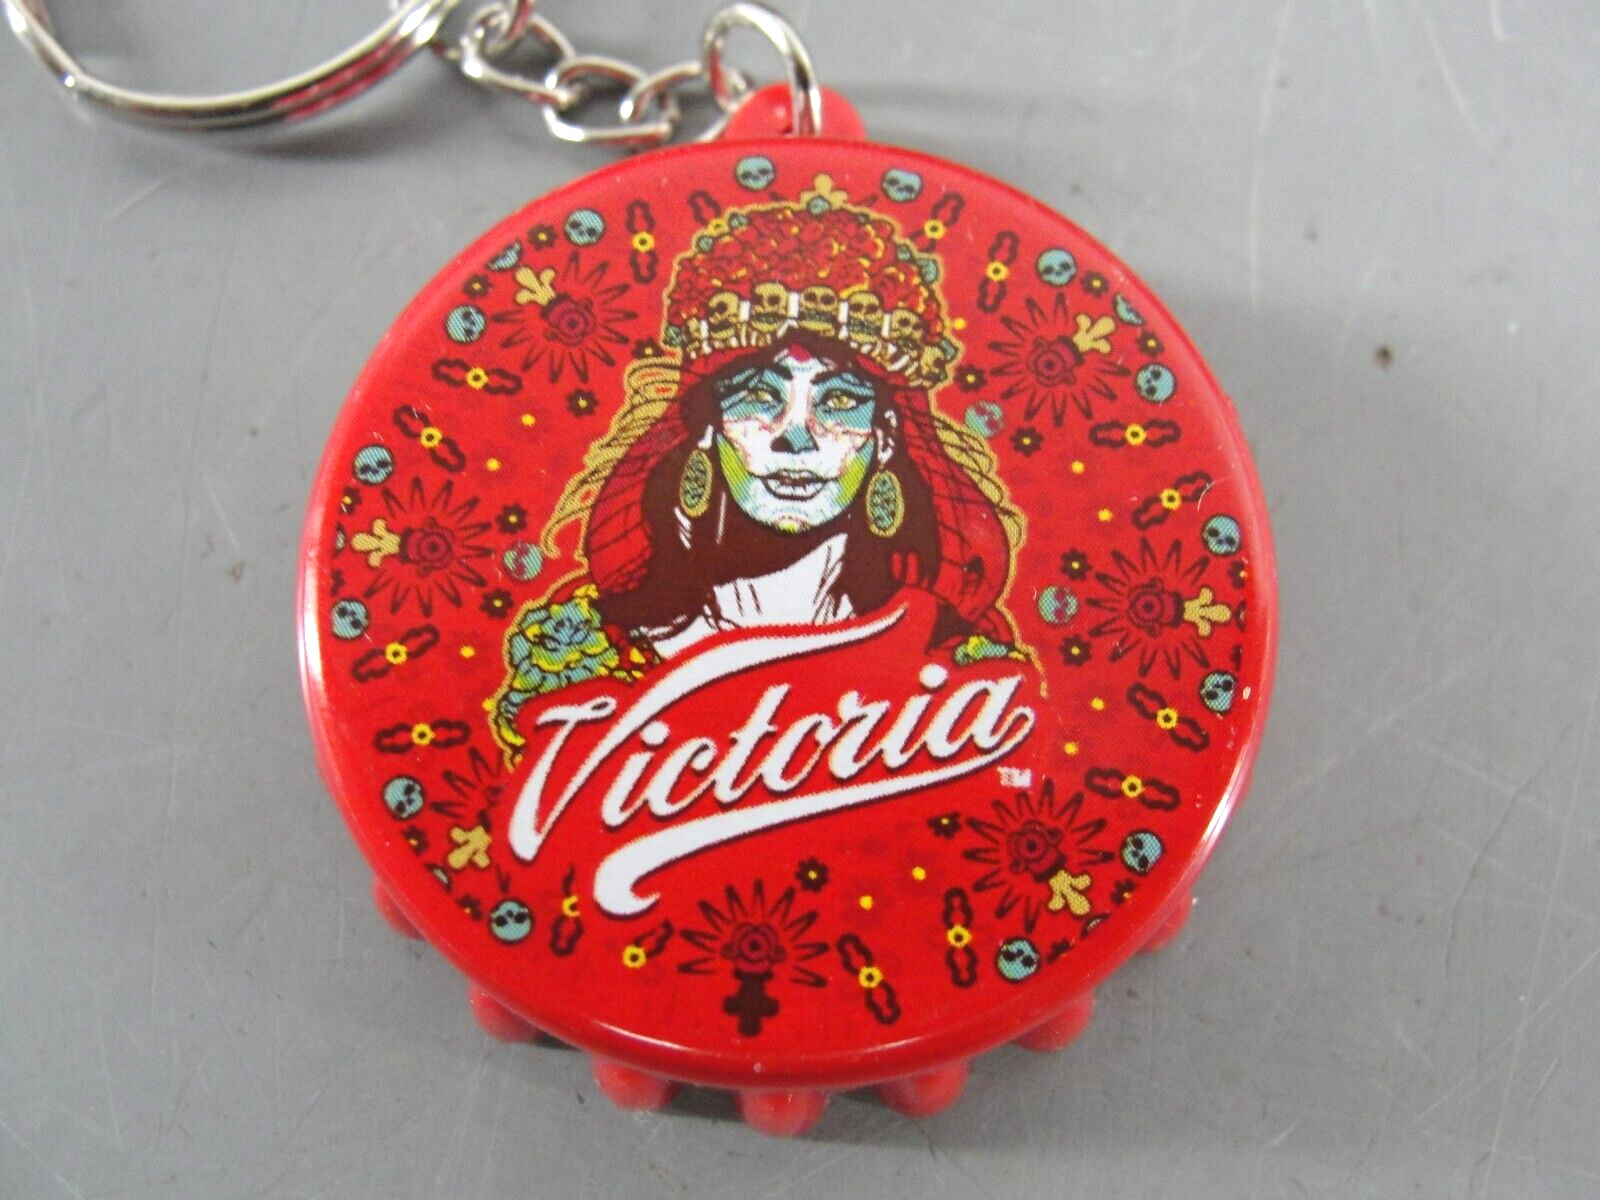 VICTORIA BEER BOTTLE CAP OPENER LOT 50 DAY OF THE DEAD RED KEY CHAIN CHARM NEW